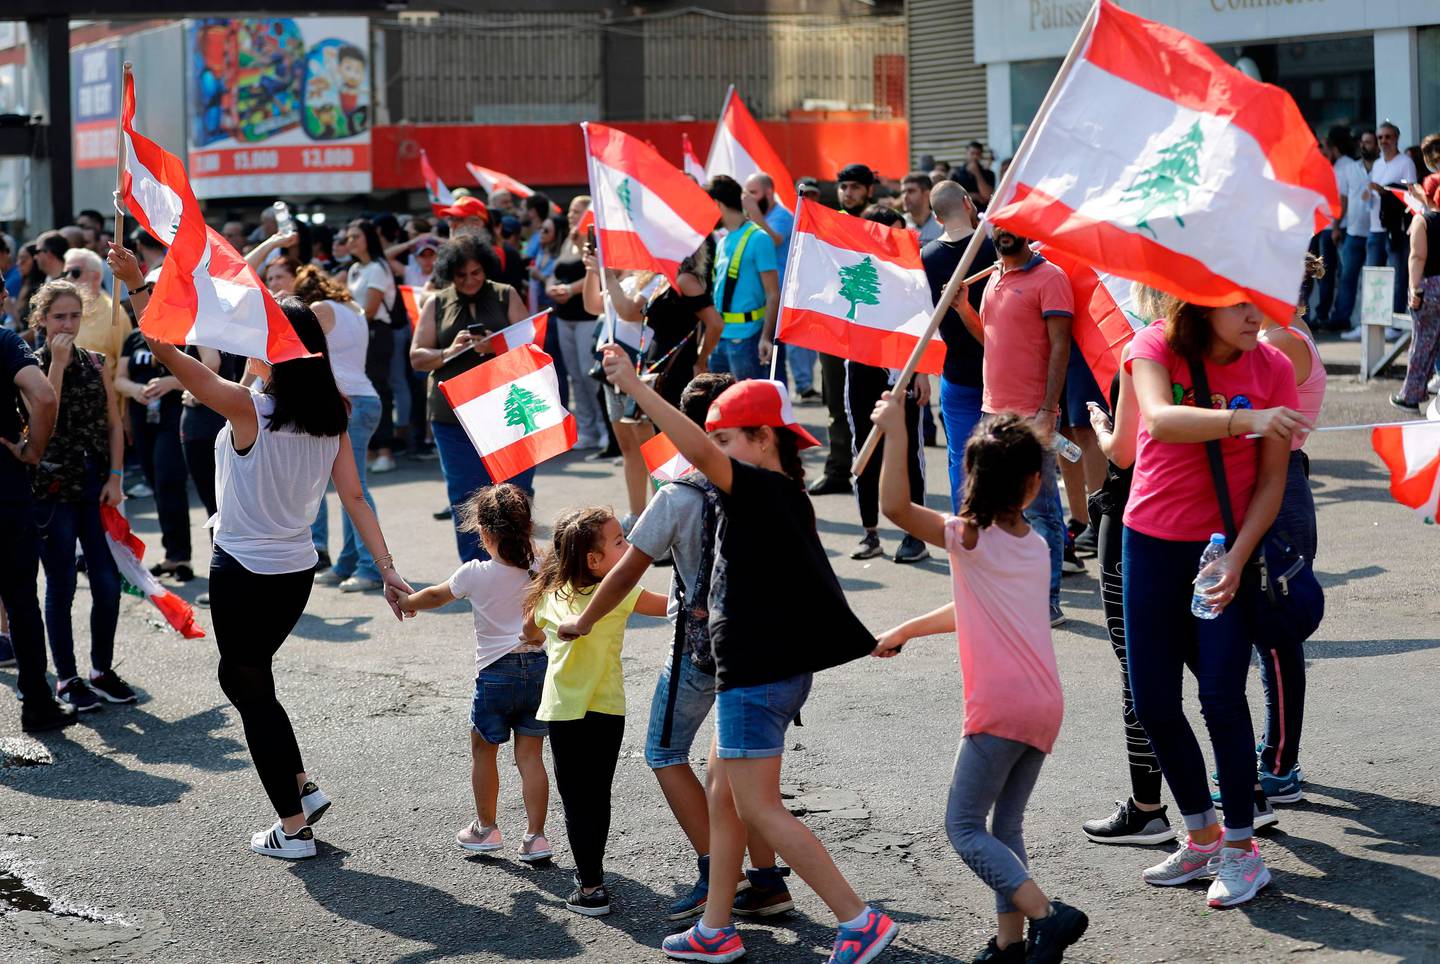 Lebanese school children join protests in the area Zouk Mosbeh, north of the capital Beirut, on October 21, 2019, as demonstrations against corruption continue for a fifth day. - Lebanon's teetering government is expected today to approve a belated economic rescue plan as the nation prepared for a fifth day of mass protests against the ruling elite.
A proposed tax on mobile messaging applications last week sparked a spontaneous, cross-sectarian mobilisation that has brought Lebanon to a standstill and put the entire political class in the dock. (Photo by JOSEPH EID / AFP)